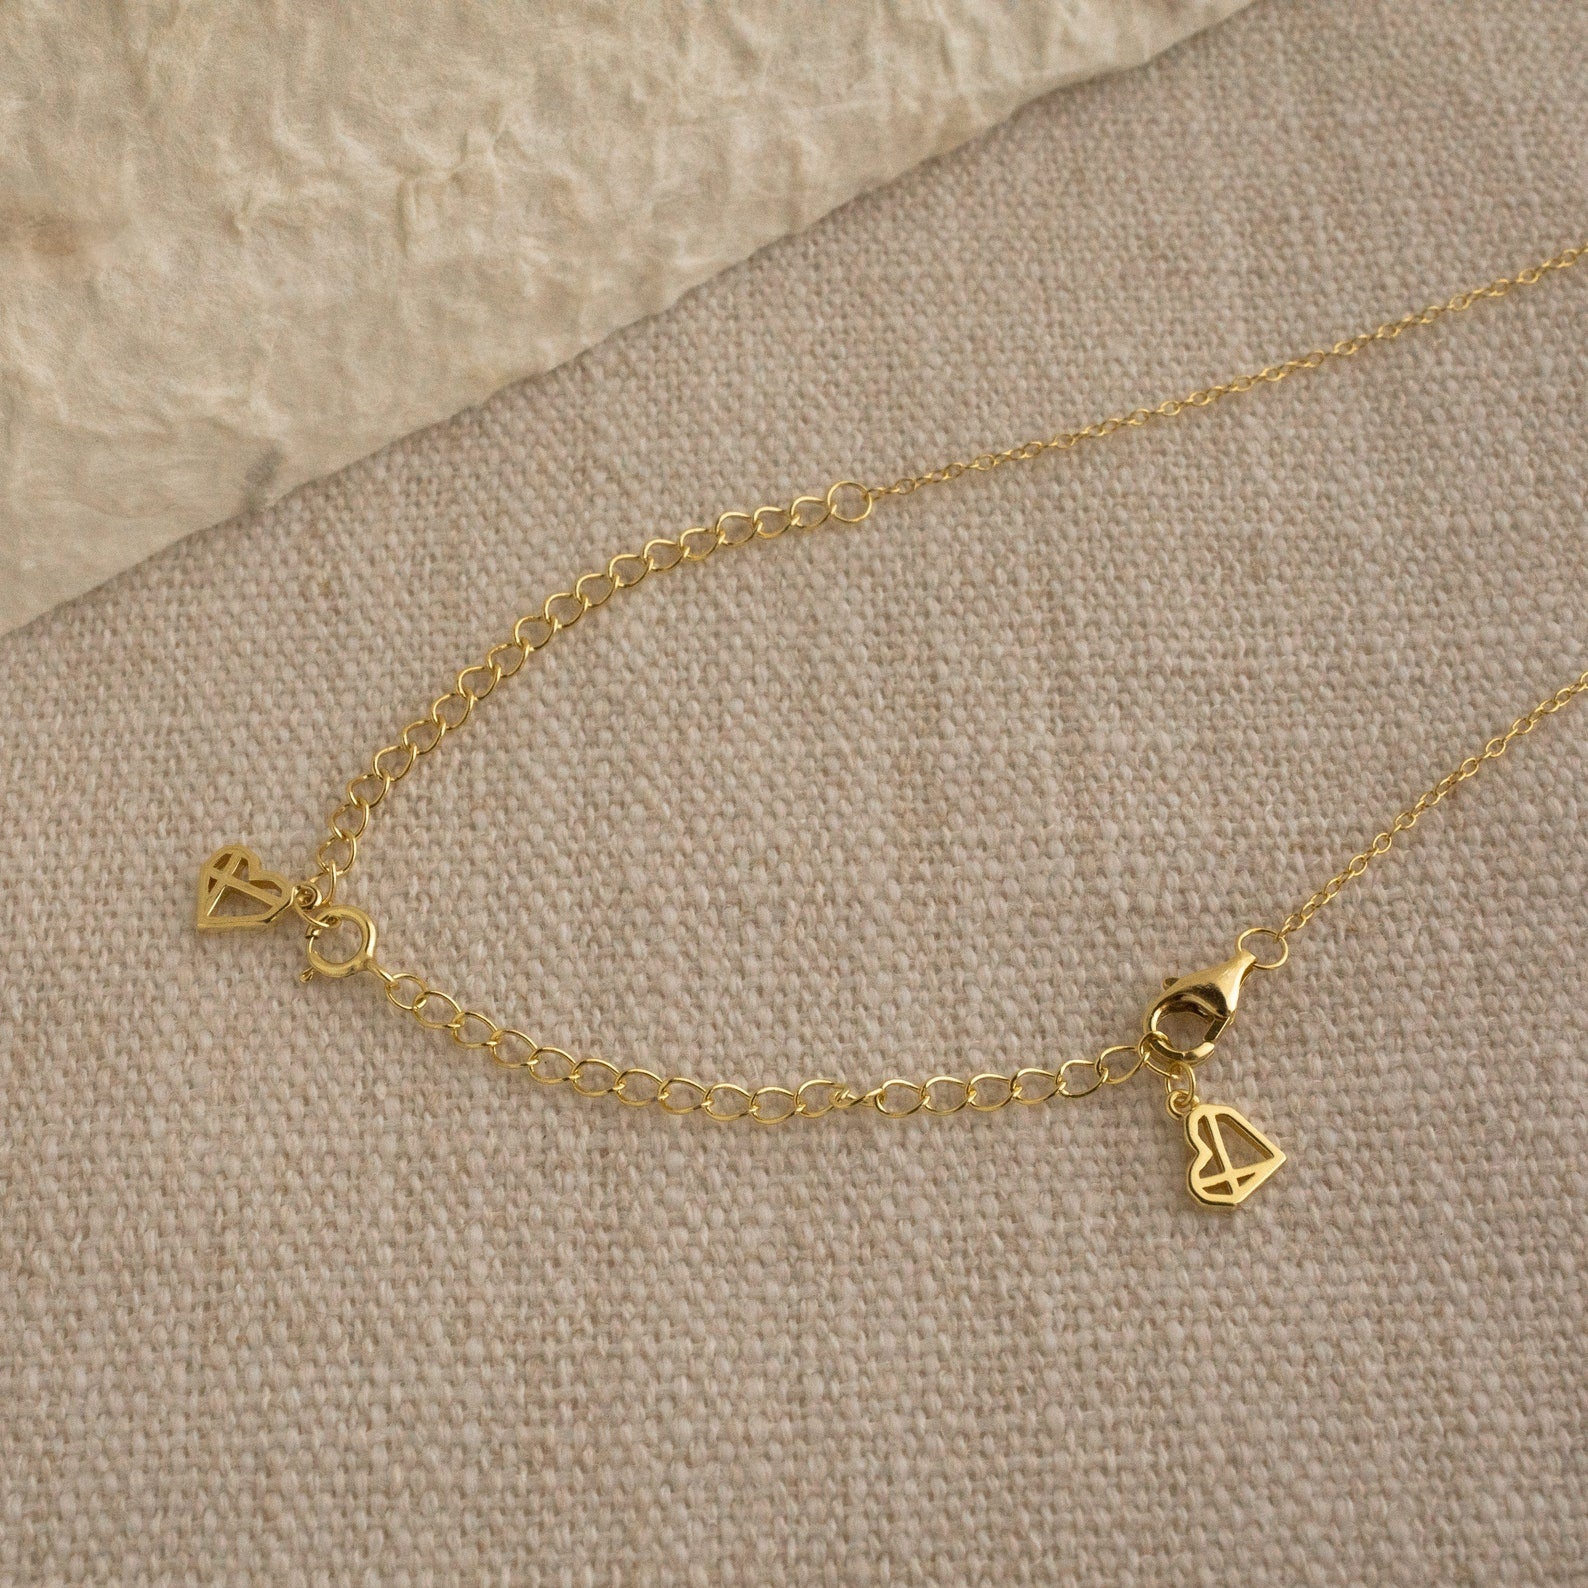  14K Yellow Gold 2 Inch Tiny Necklace Chain Extender